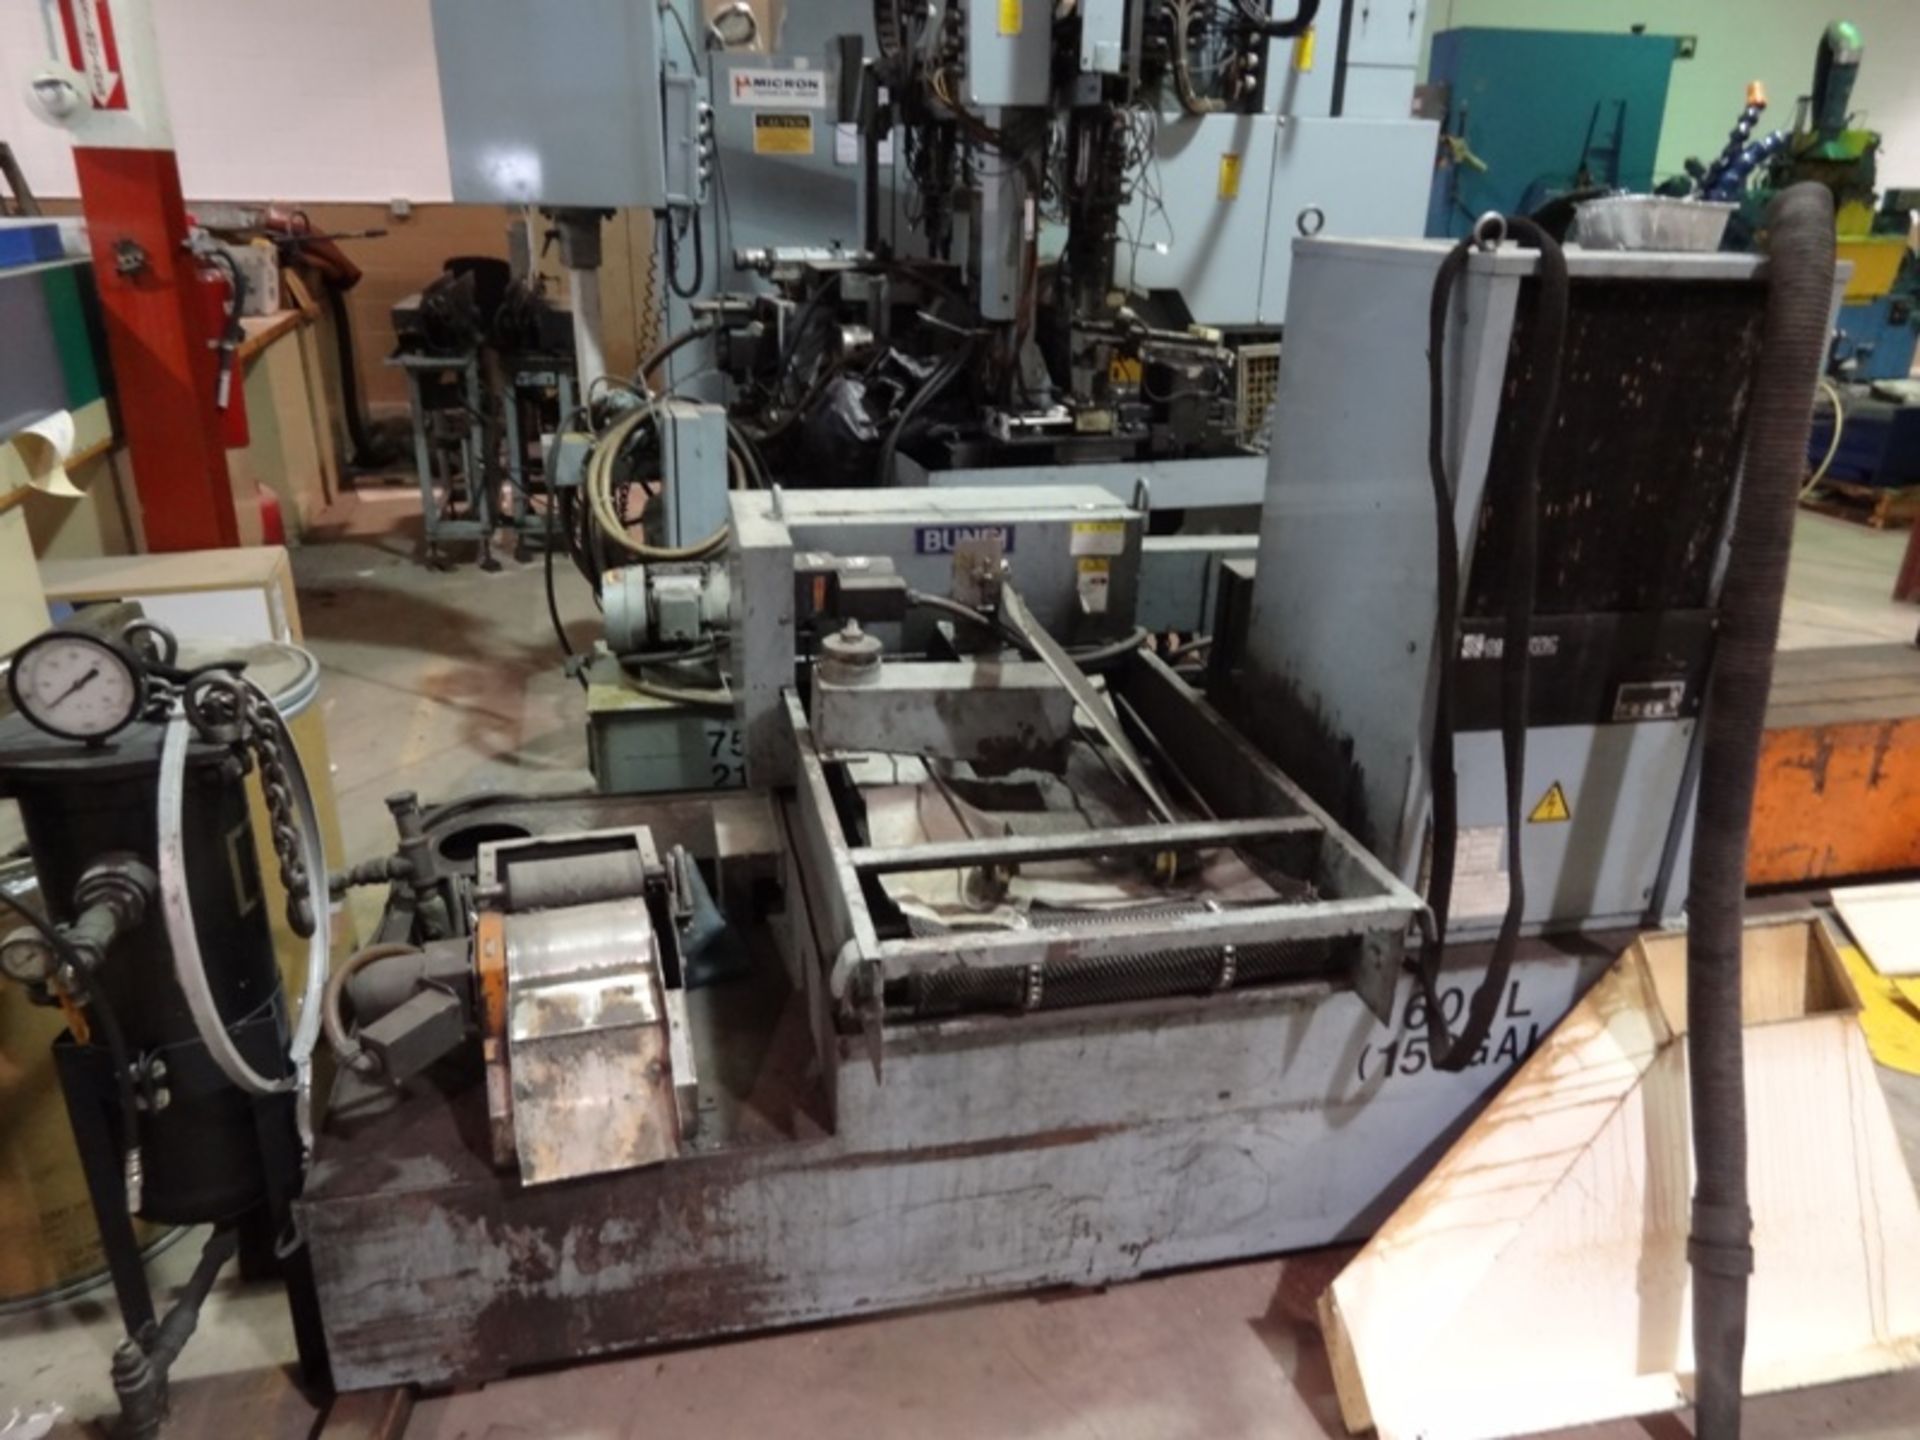 MICRON MODEL MD-450-RD CNC CENTERLESS GRINDER, SN 4551, YEAR 1997, LOCATION MI - Image 7 of 10